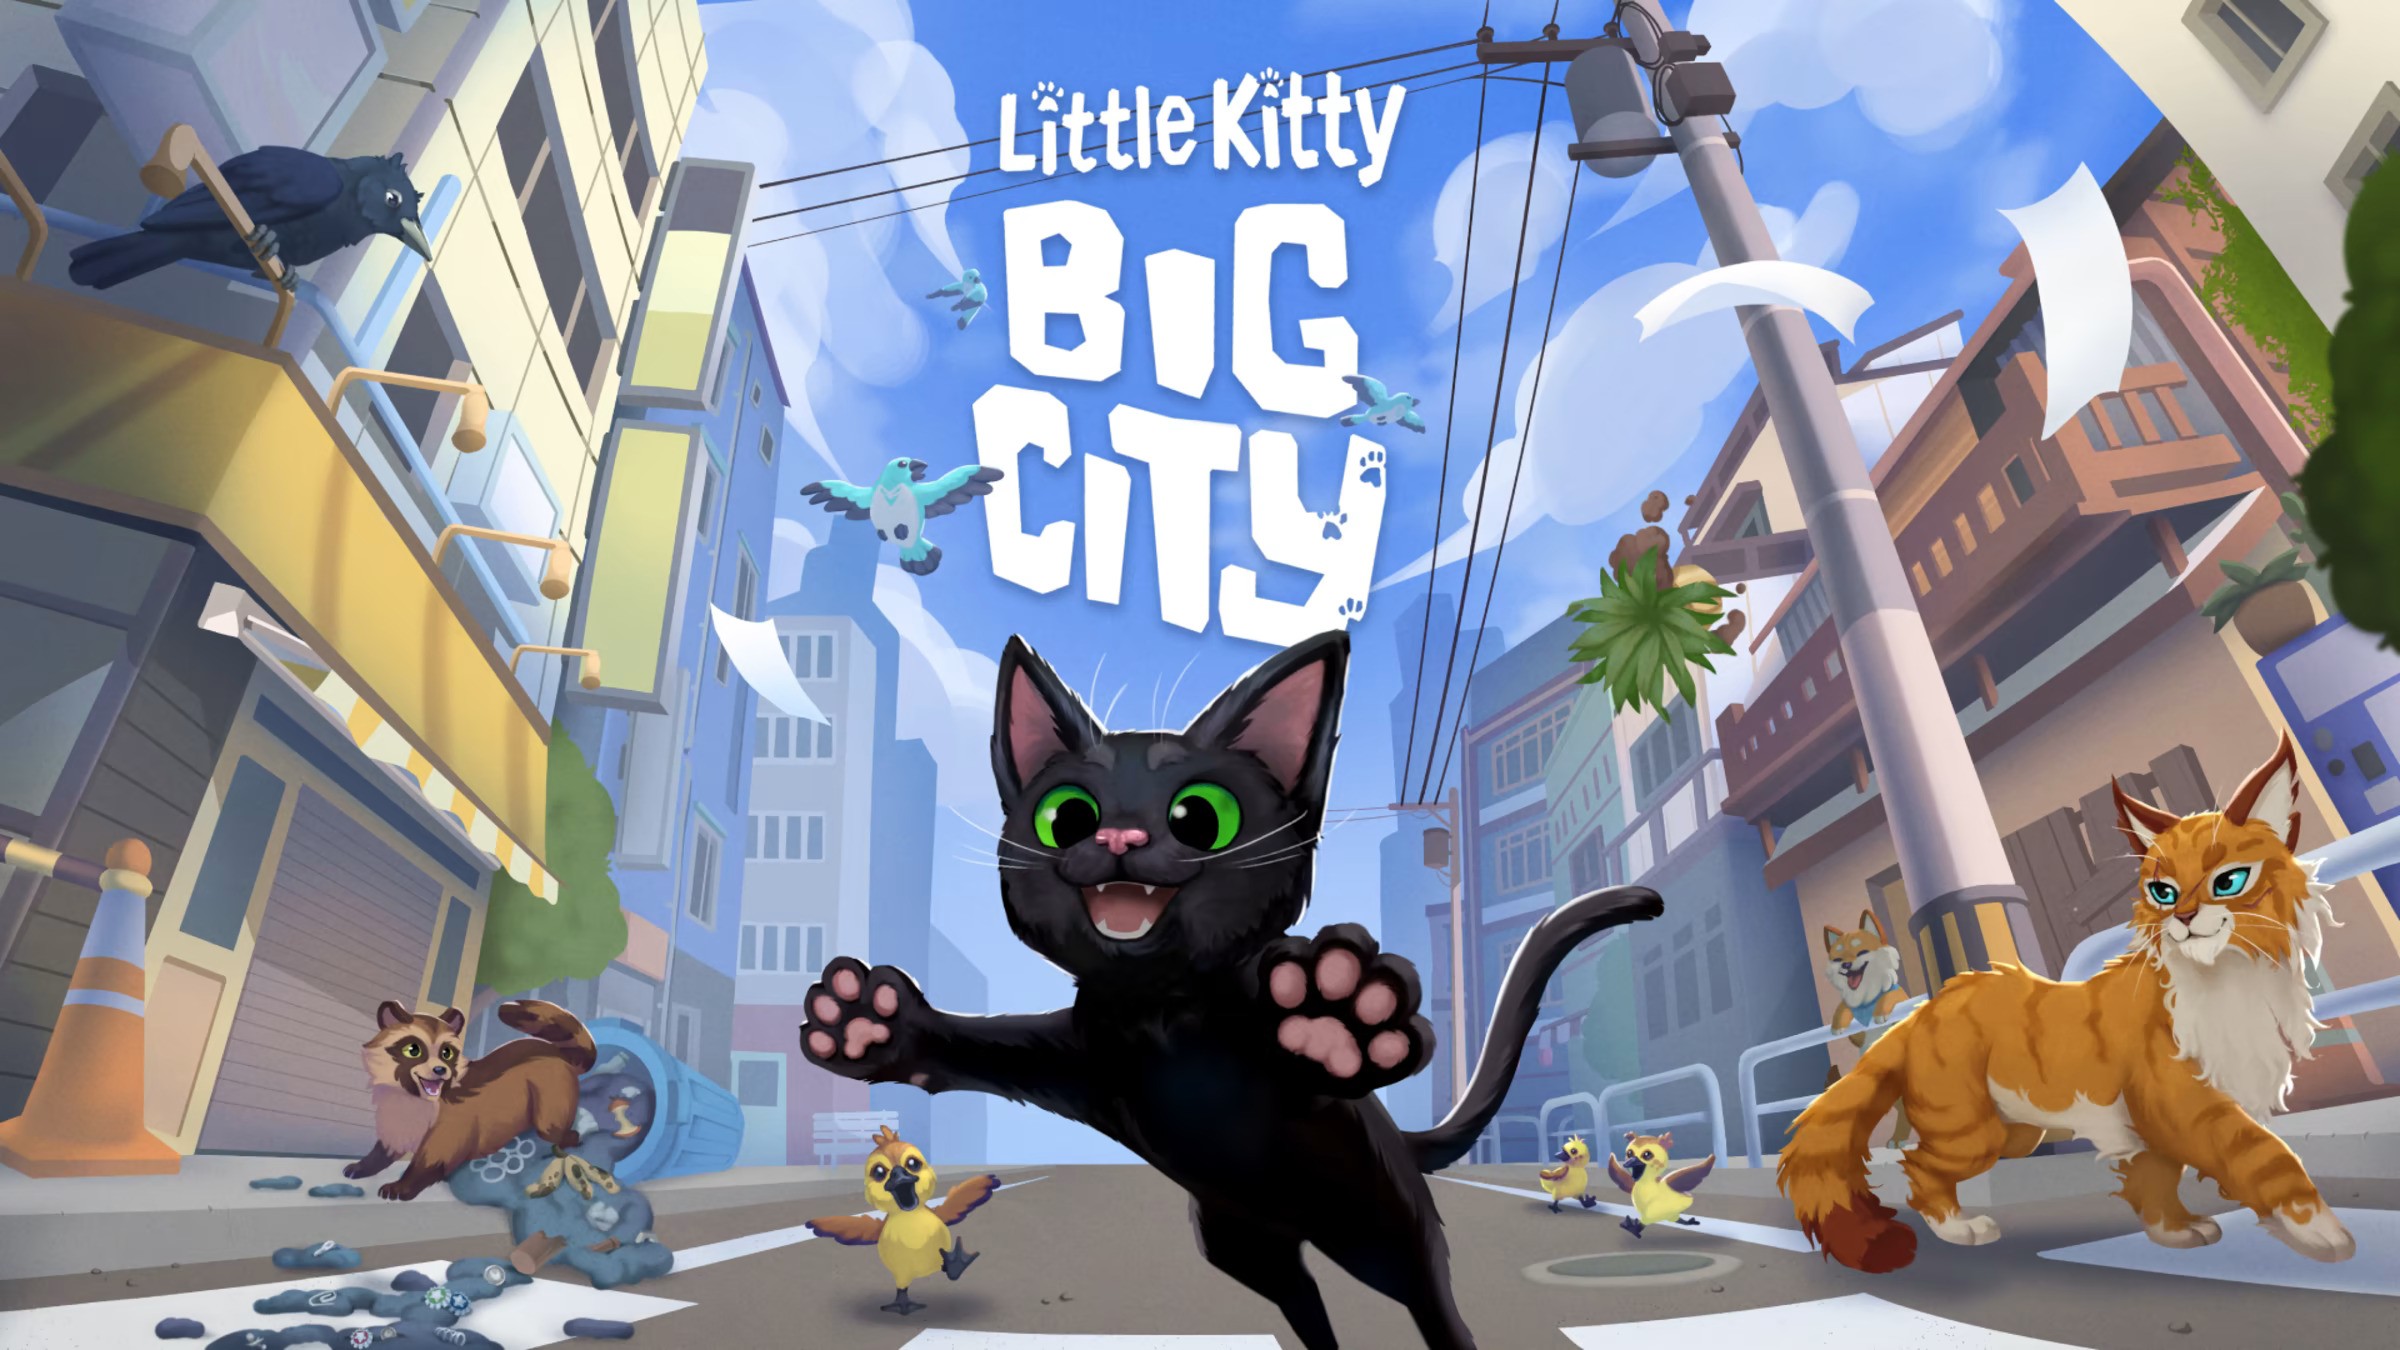 The cover art for Little Kity, Big City.